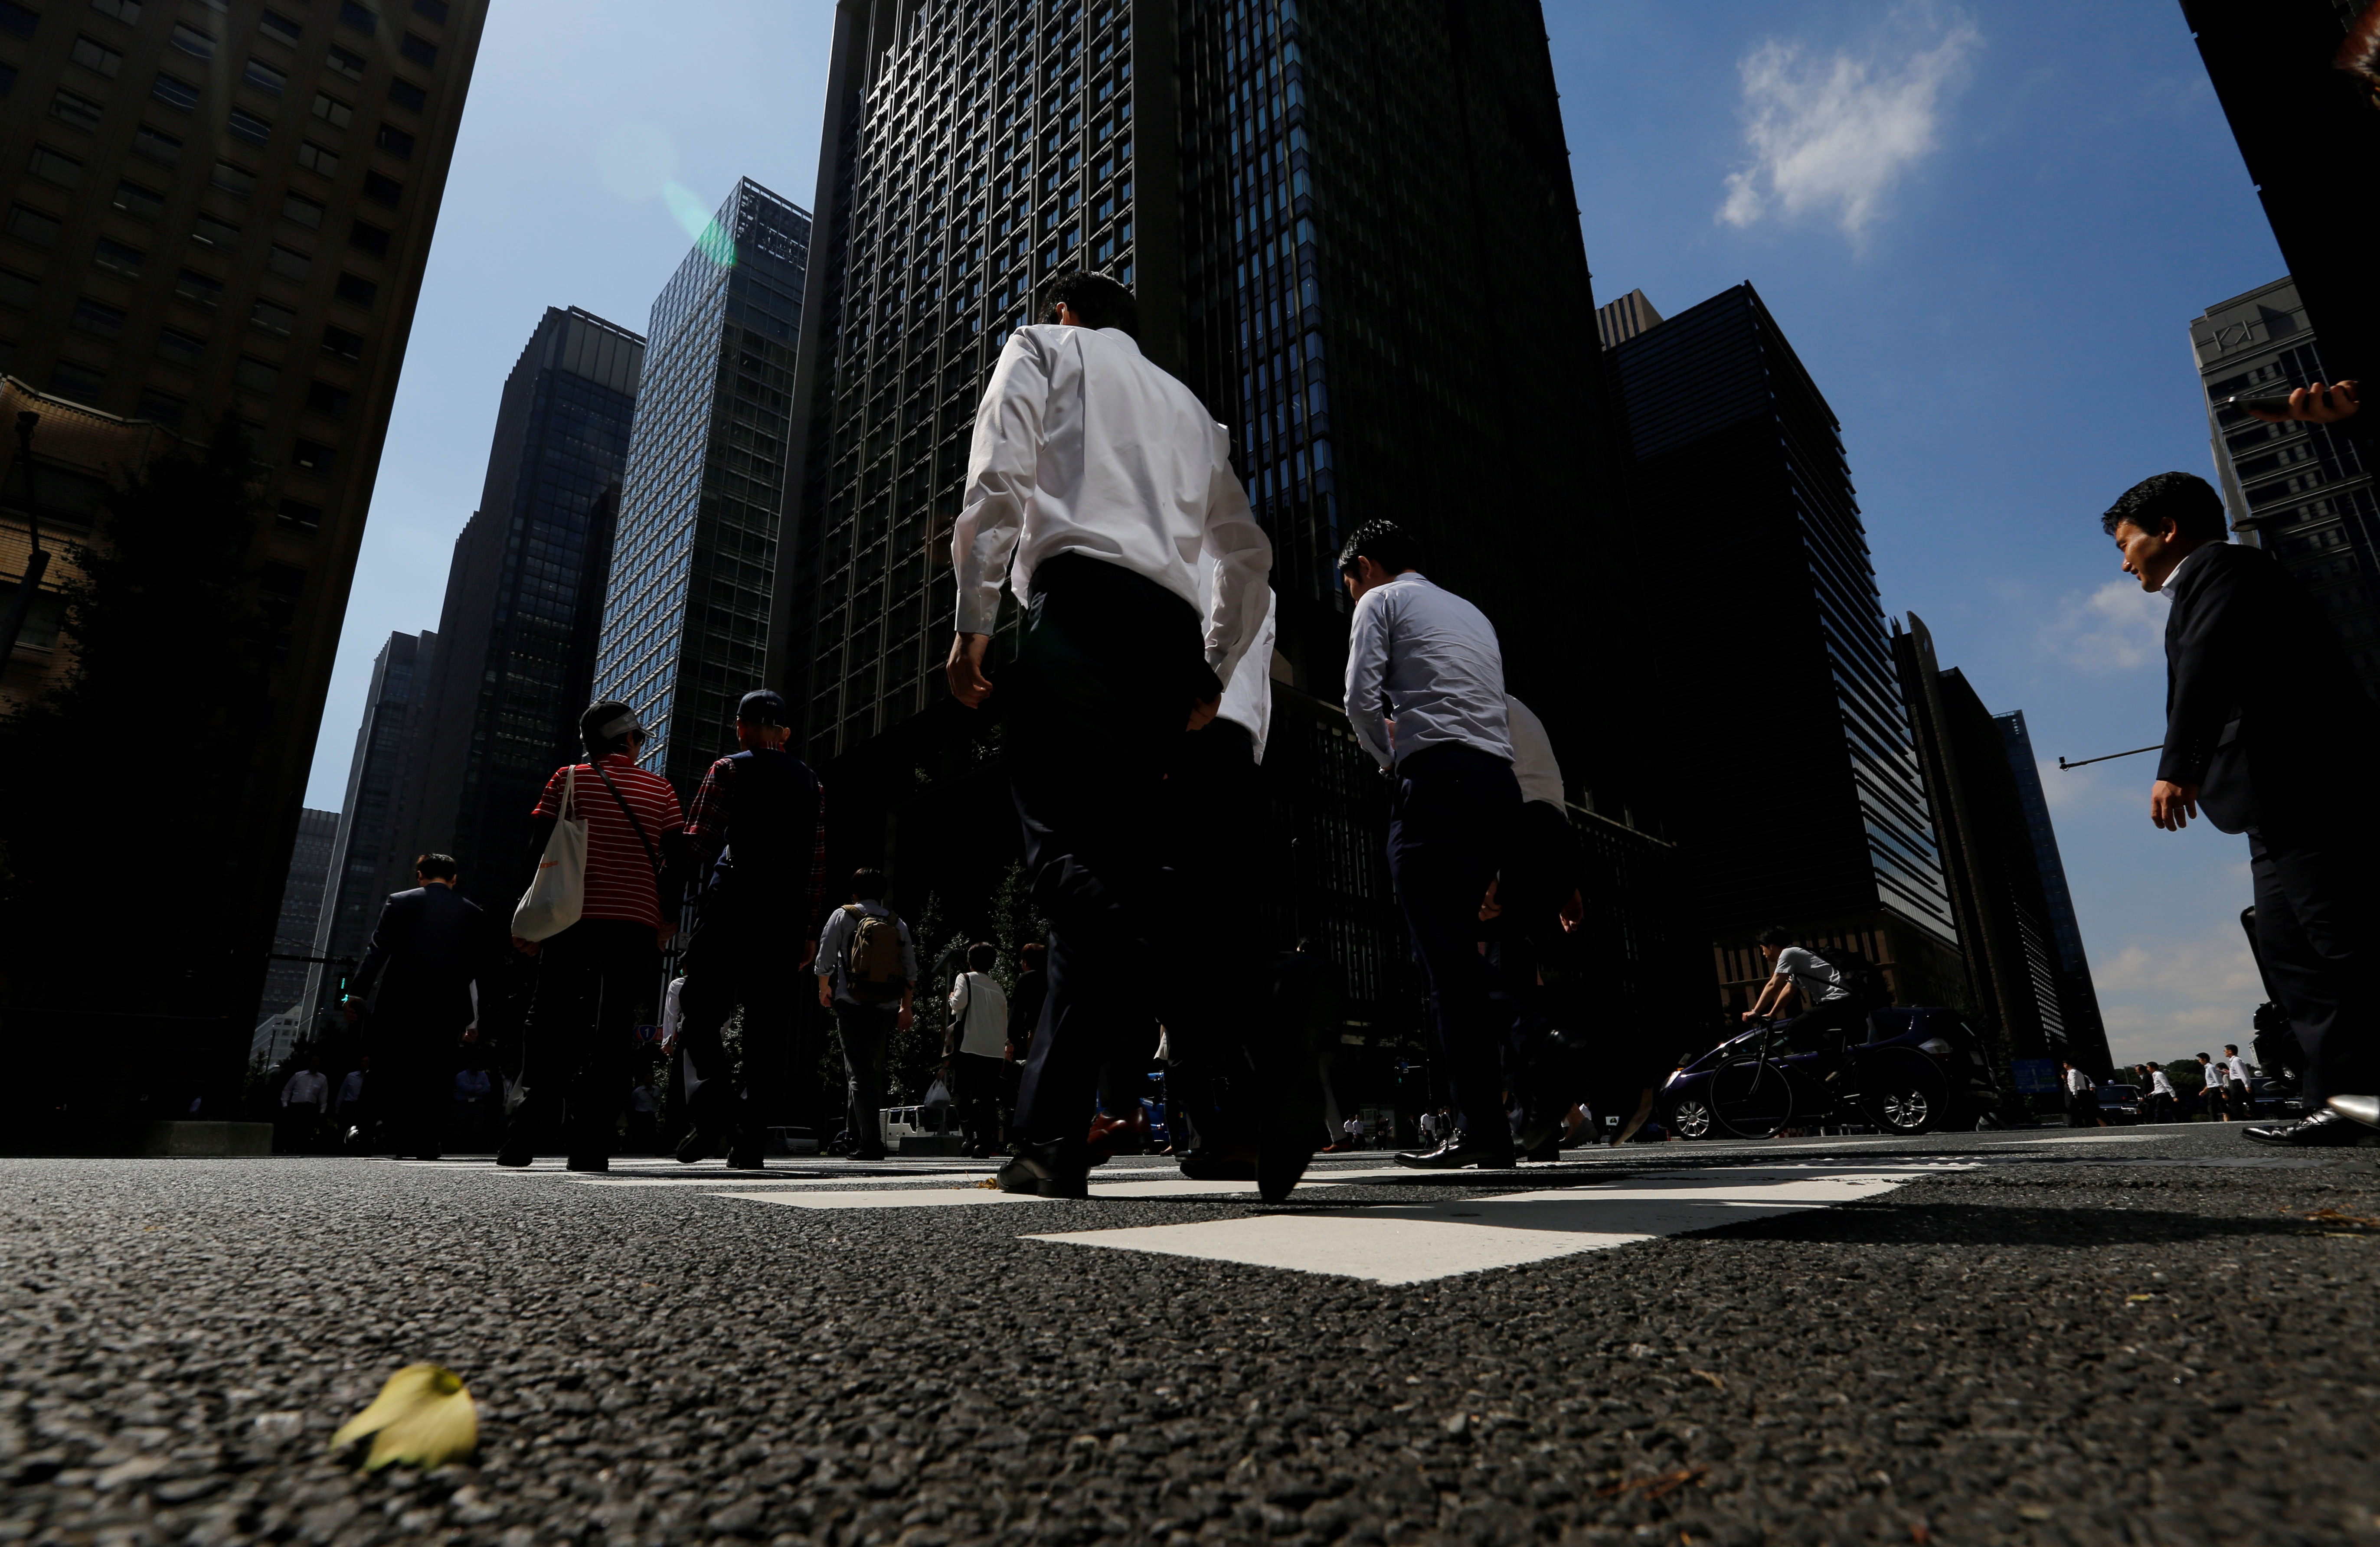 People walk on a crosswalk at a business district in central Tokyo